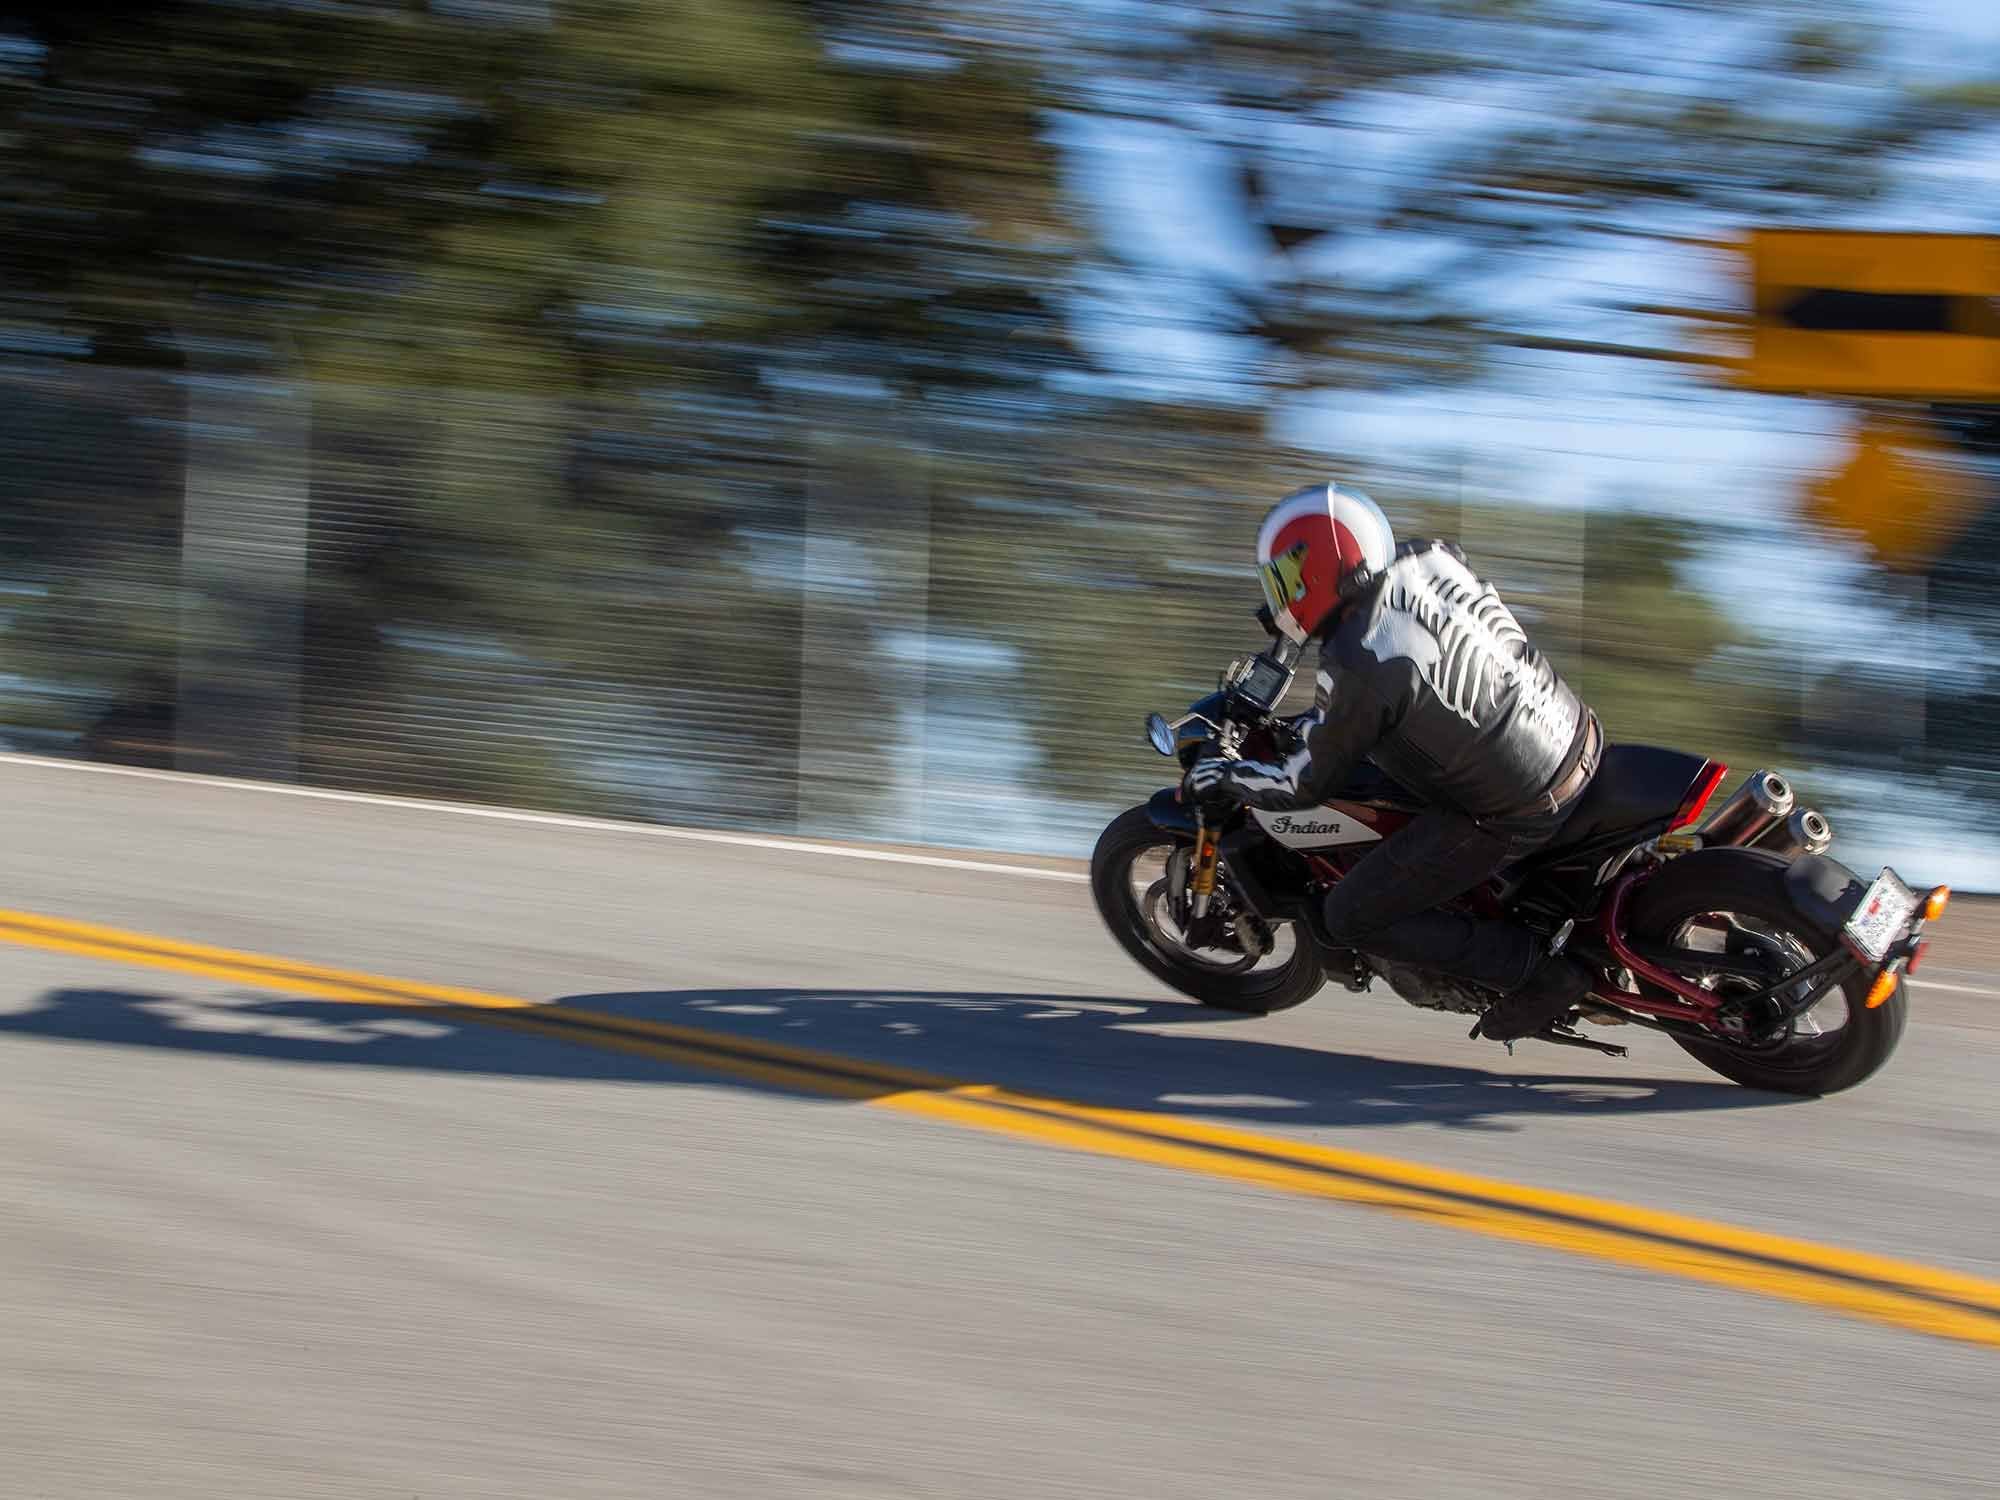 In the simplest of terms: Motorcycles are fun. Plain and simple.